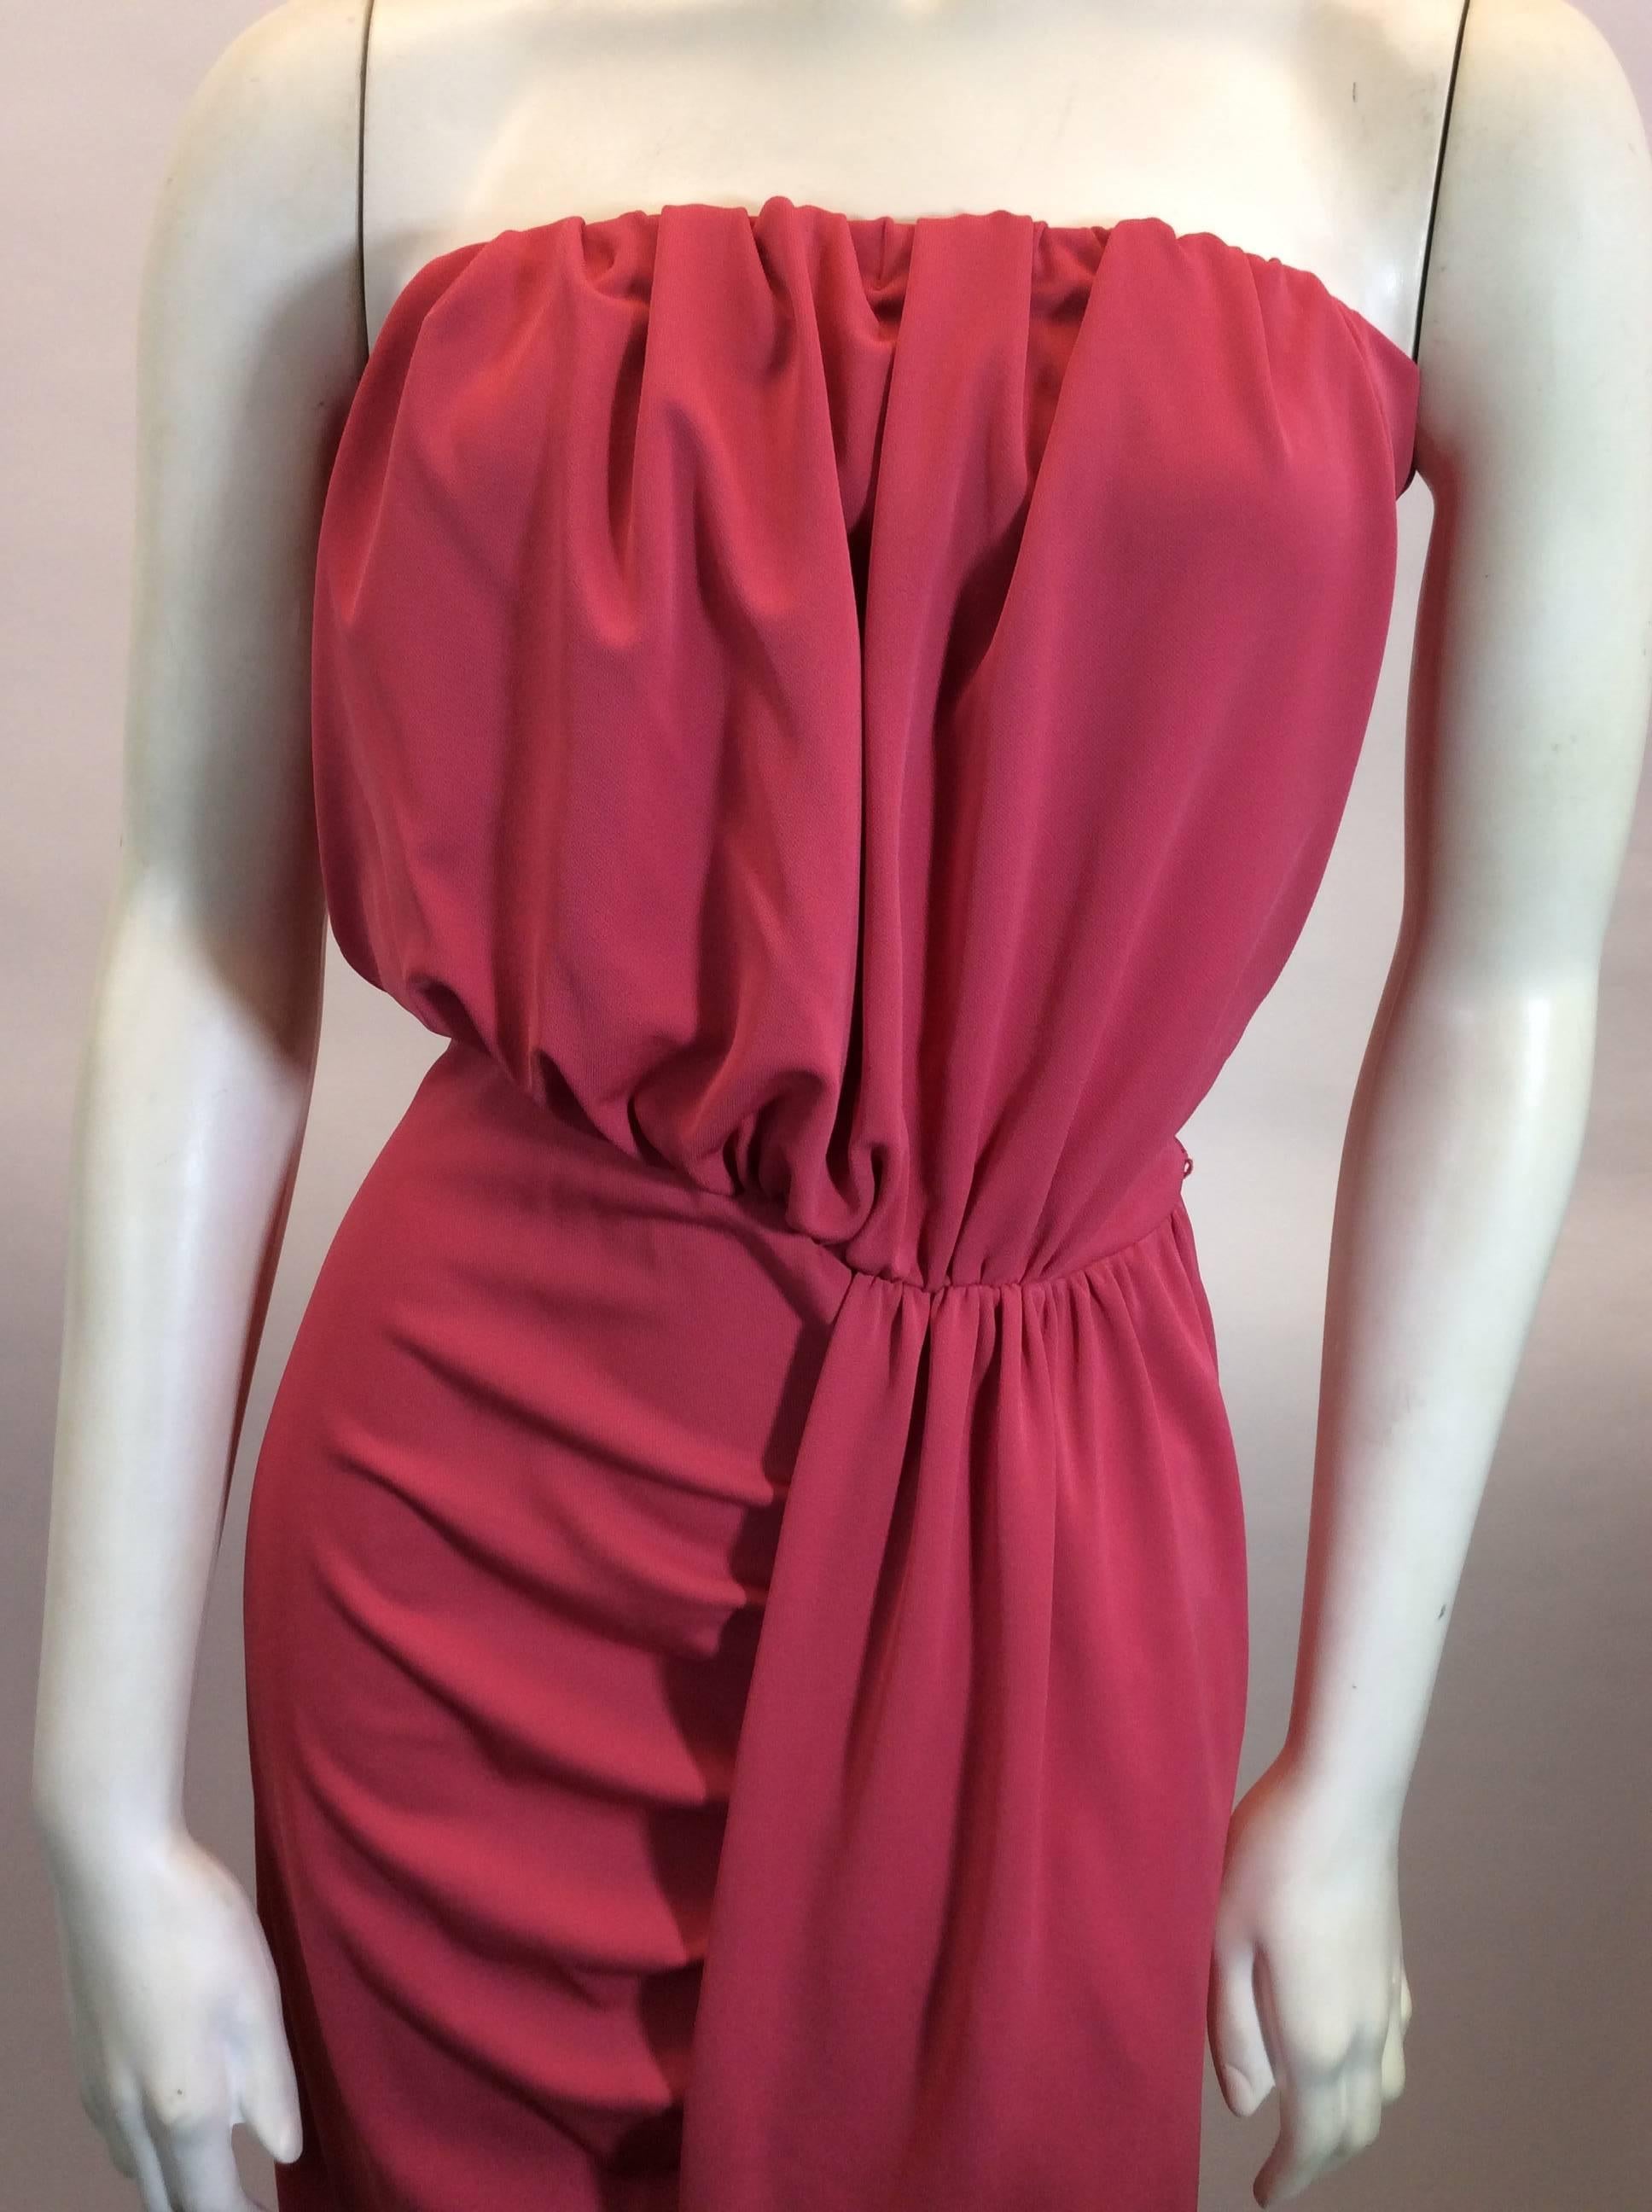 Prada Coral Draped Strapless Dress In Excellent Condition For Sale In Narberth, PA